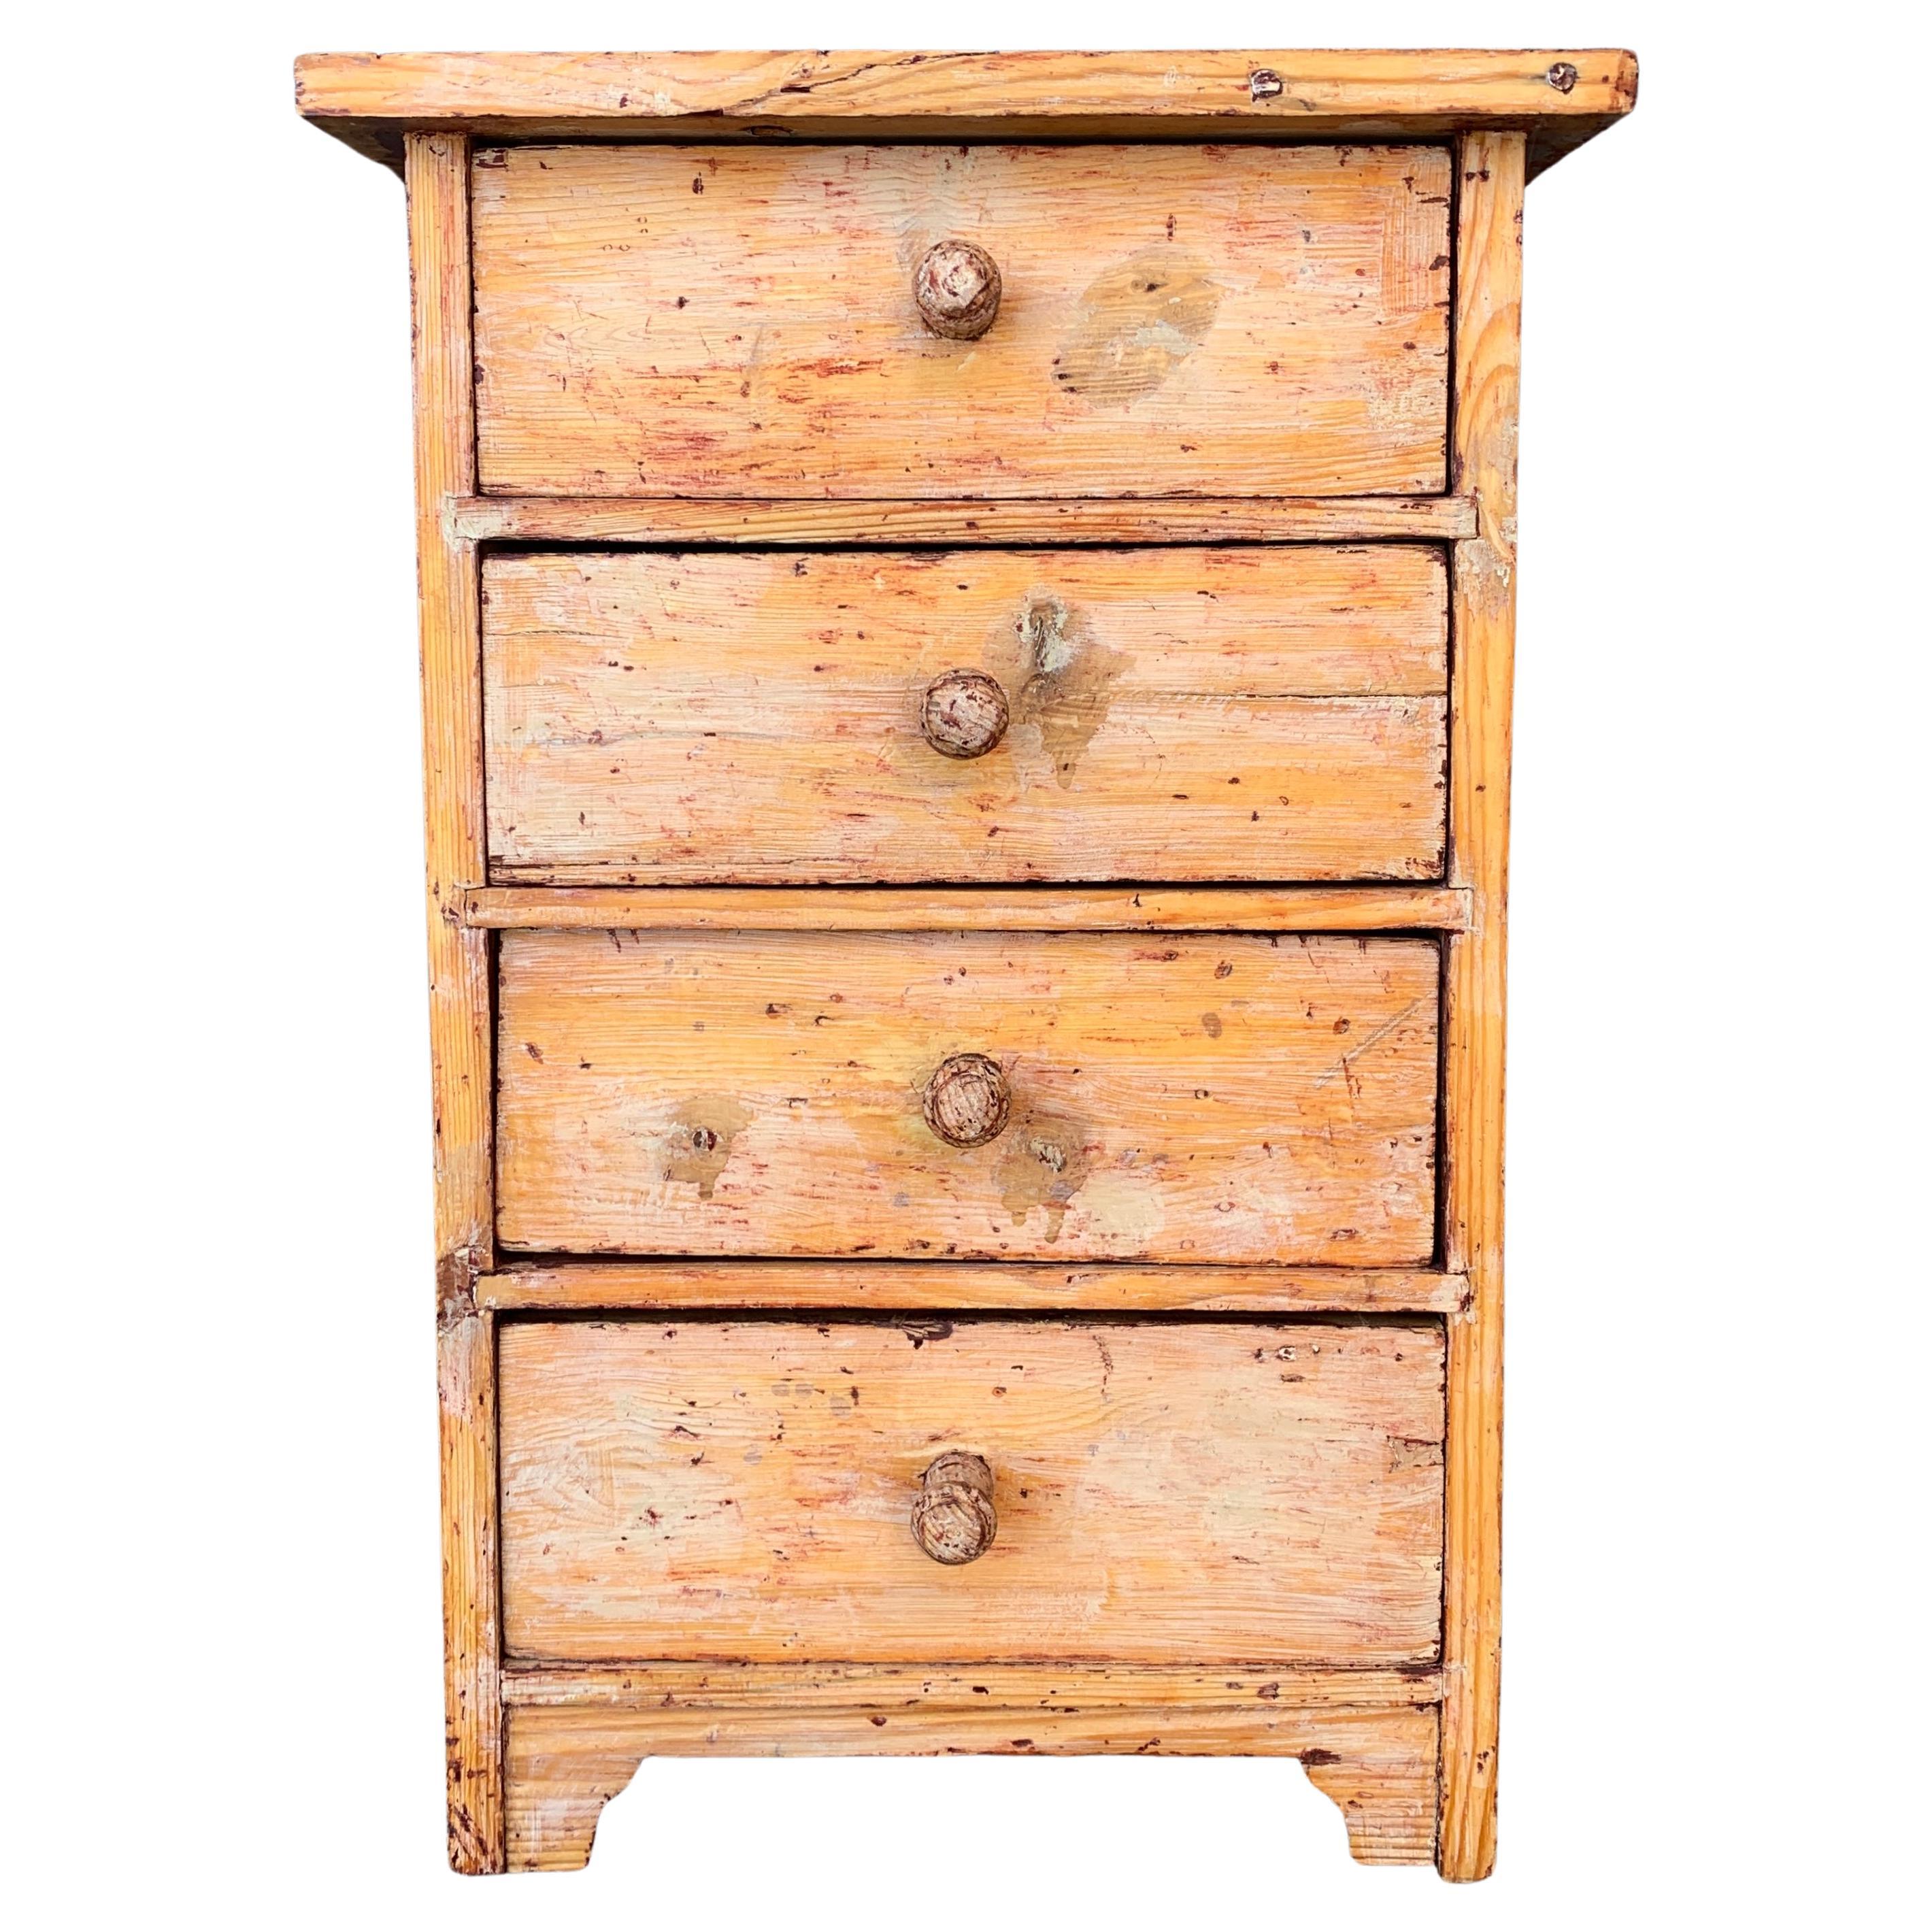 A late 19th century scraped to original patina Swedish nightstand or side table with four drawers and its original wooden handles. From the Folk Art Scandinavian culture called 